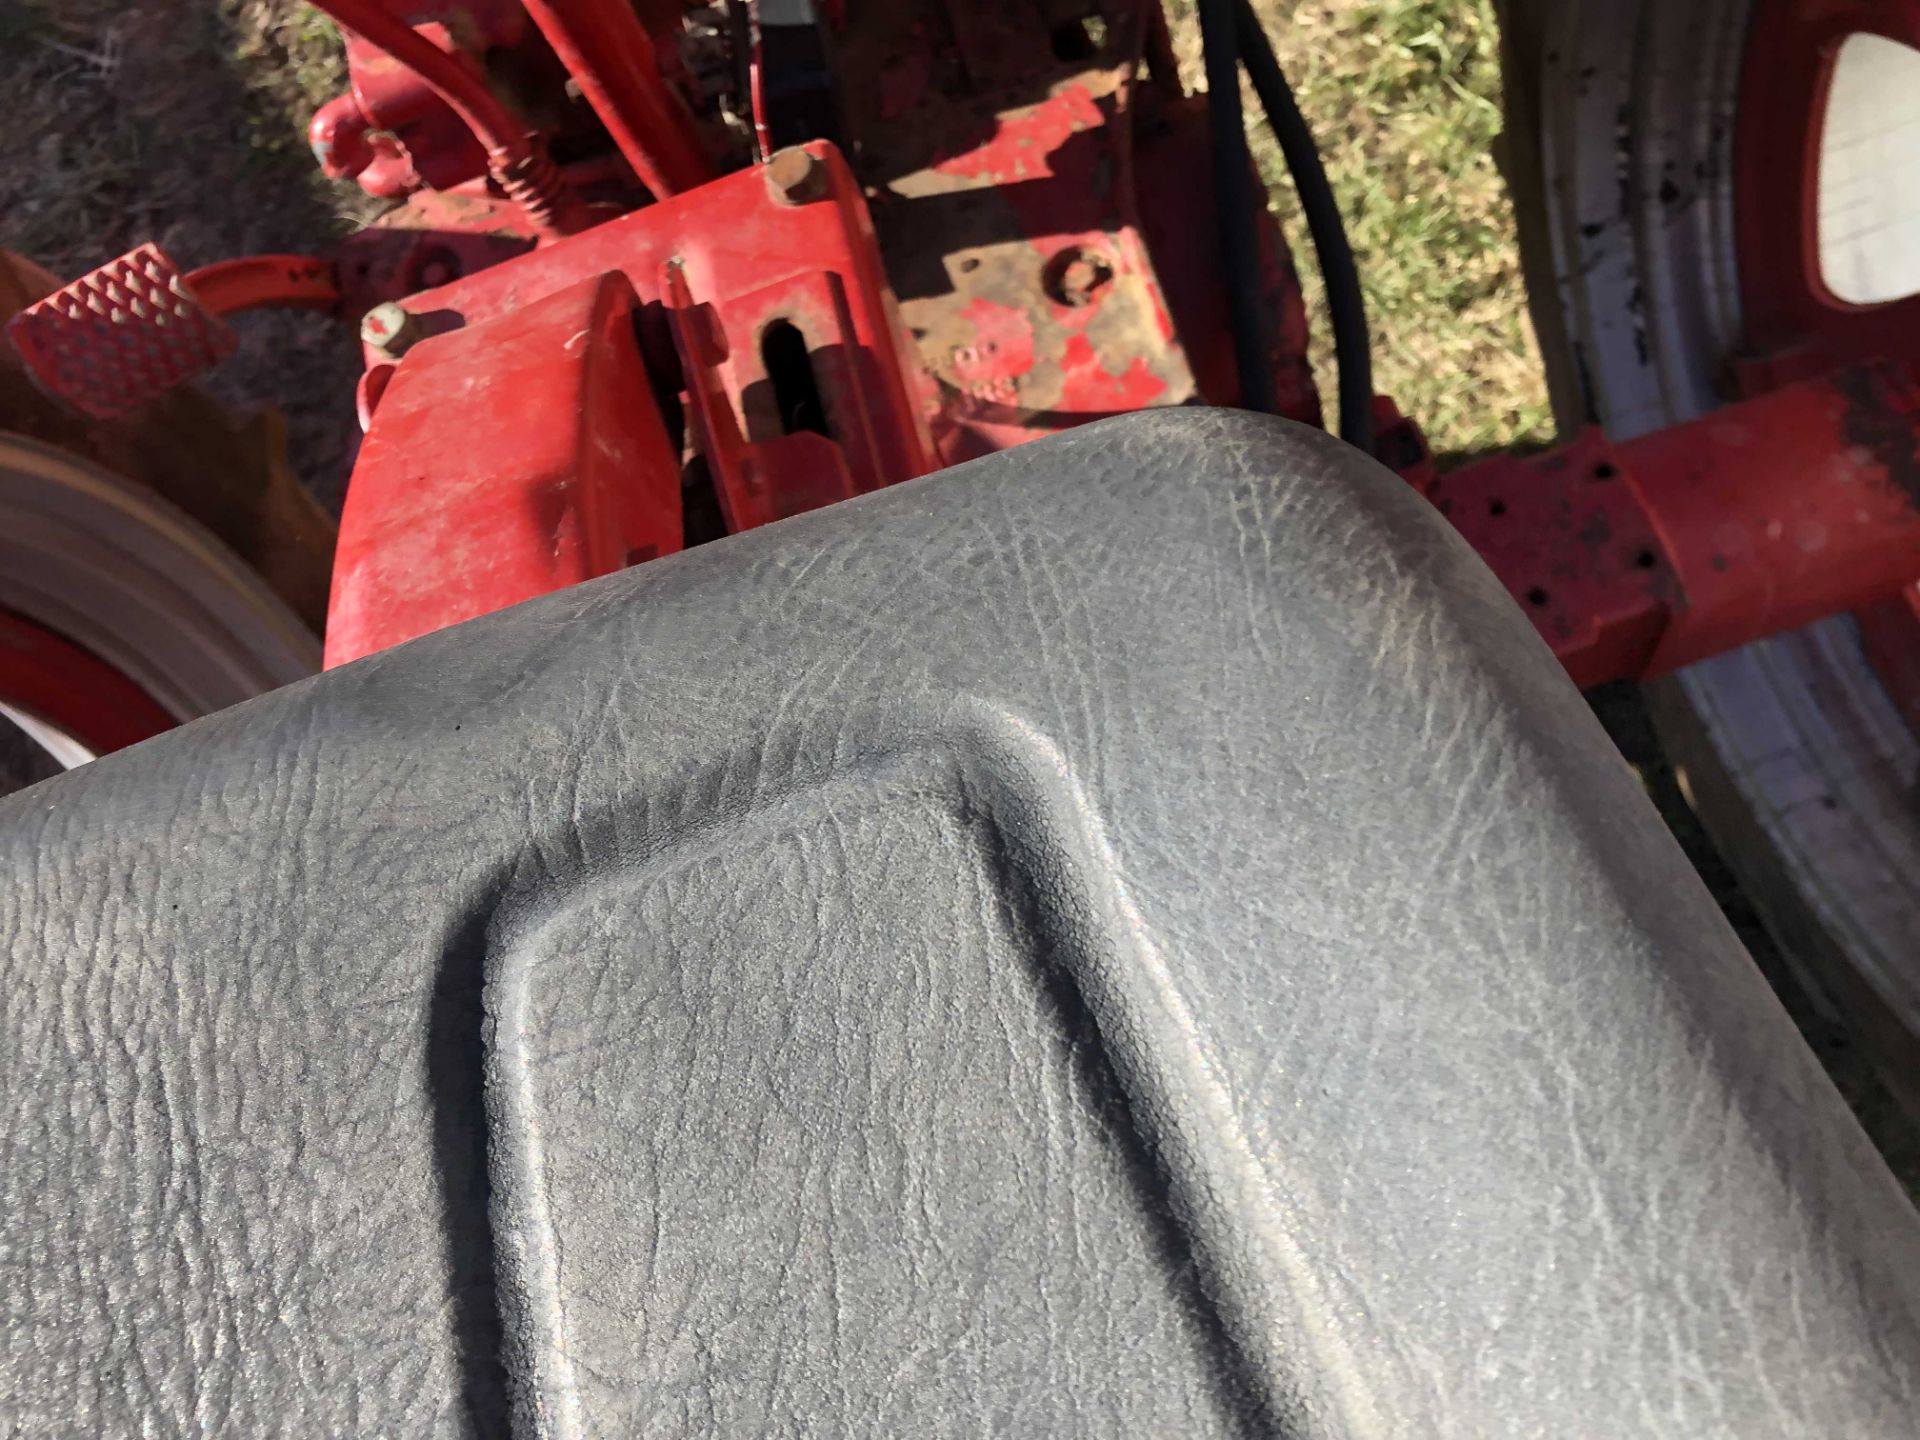 Farmall Super M tractor, 15.5-38 rears, narrow front, gas, SN L511380 J - Image 15 of 15